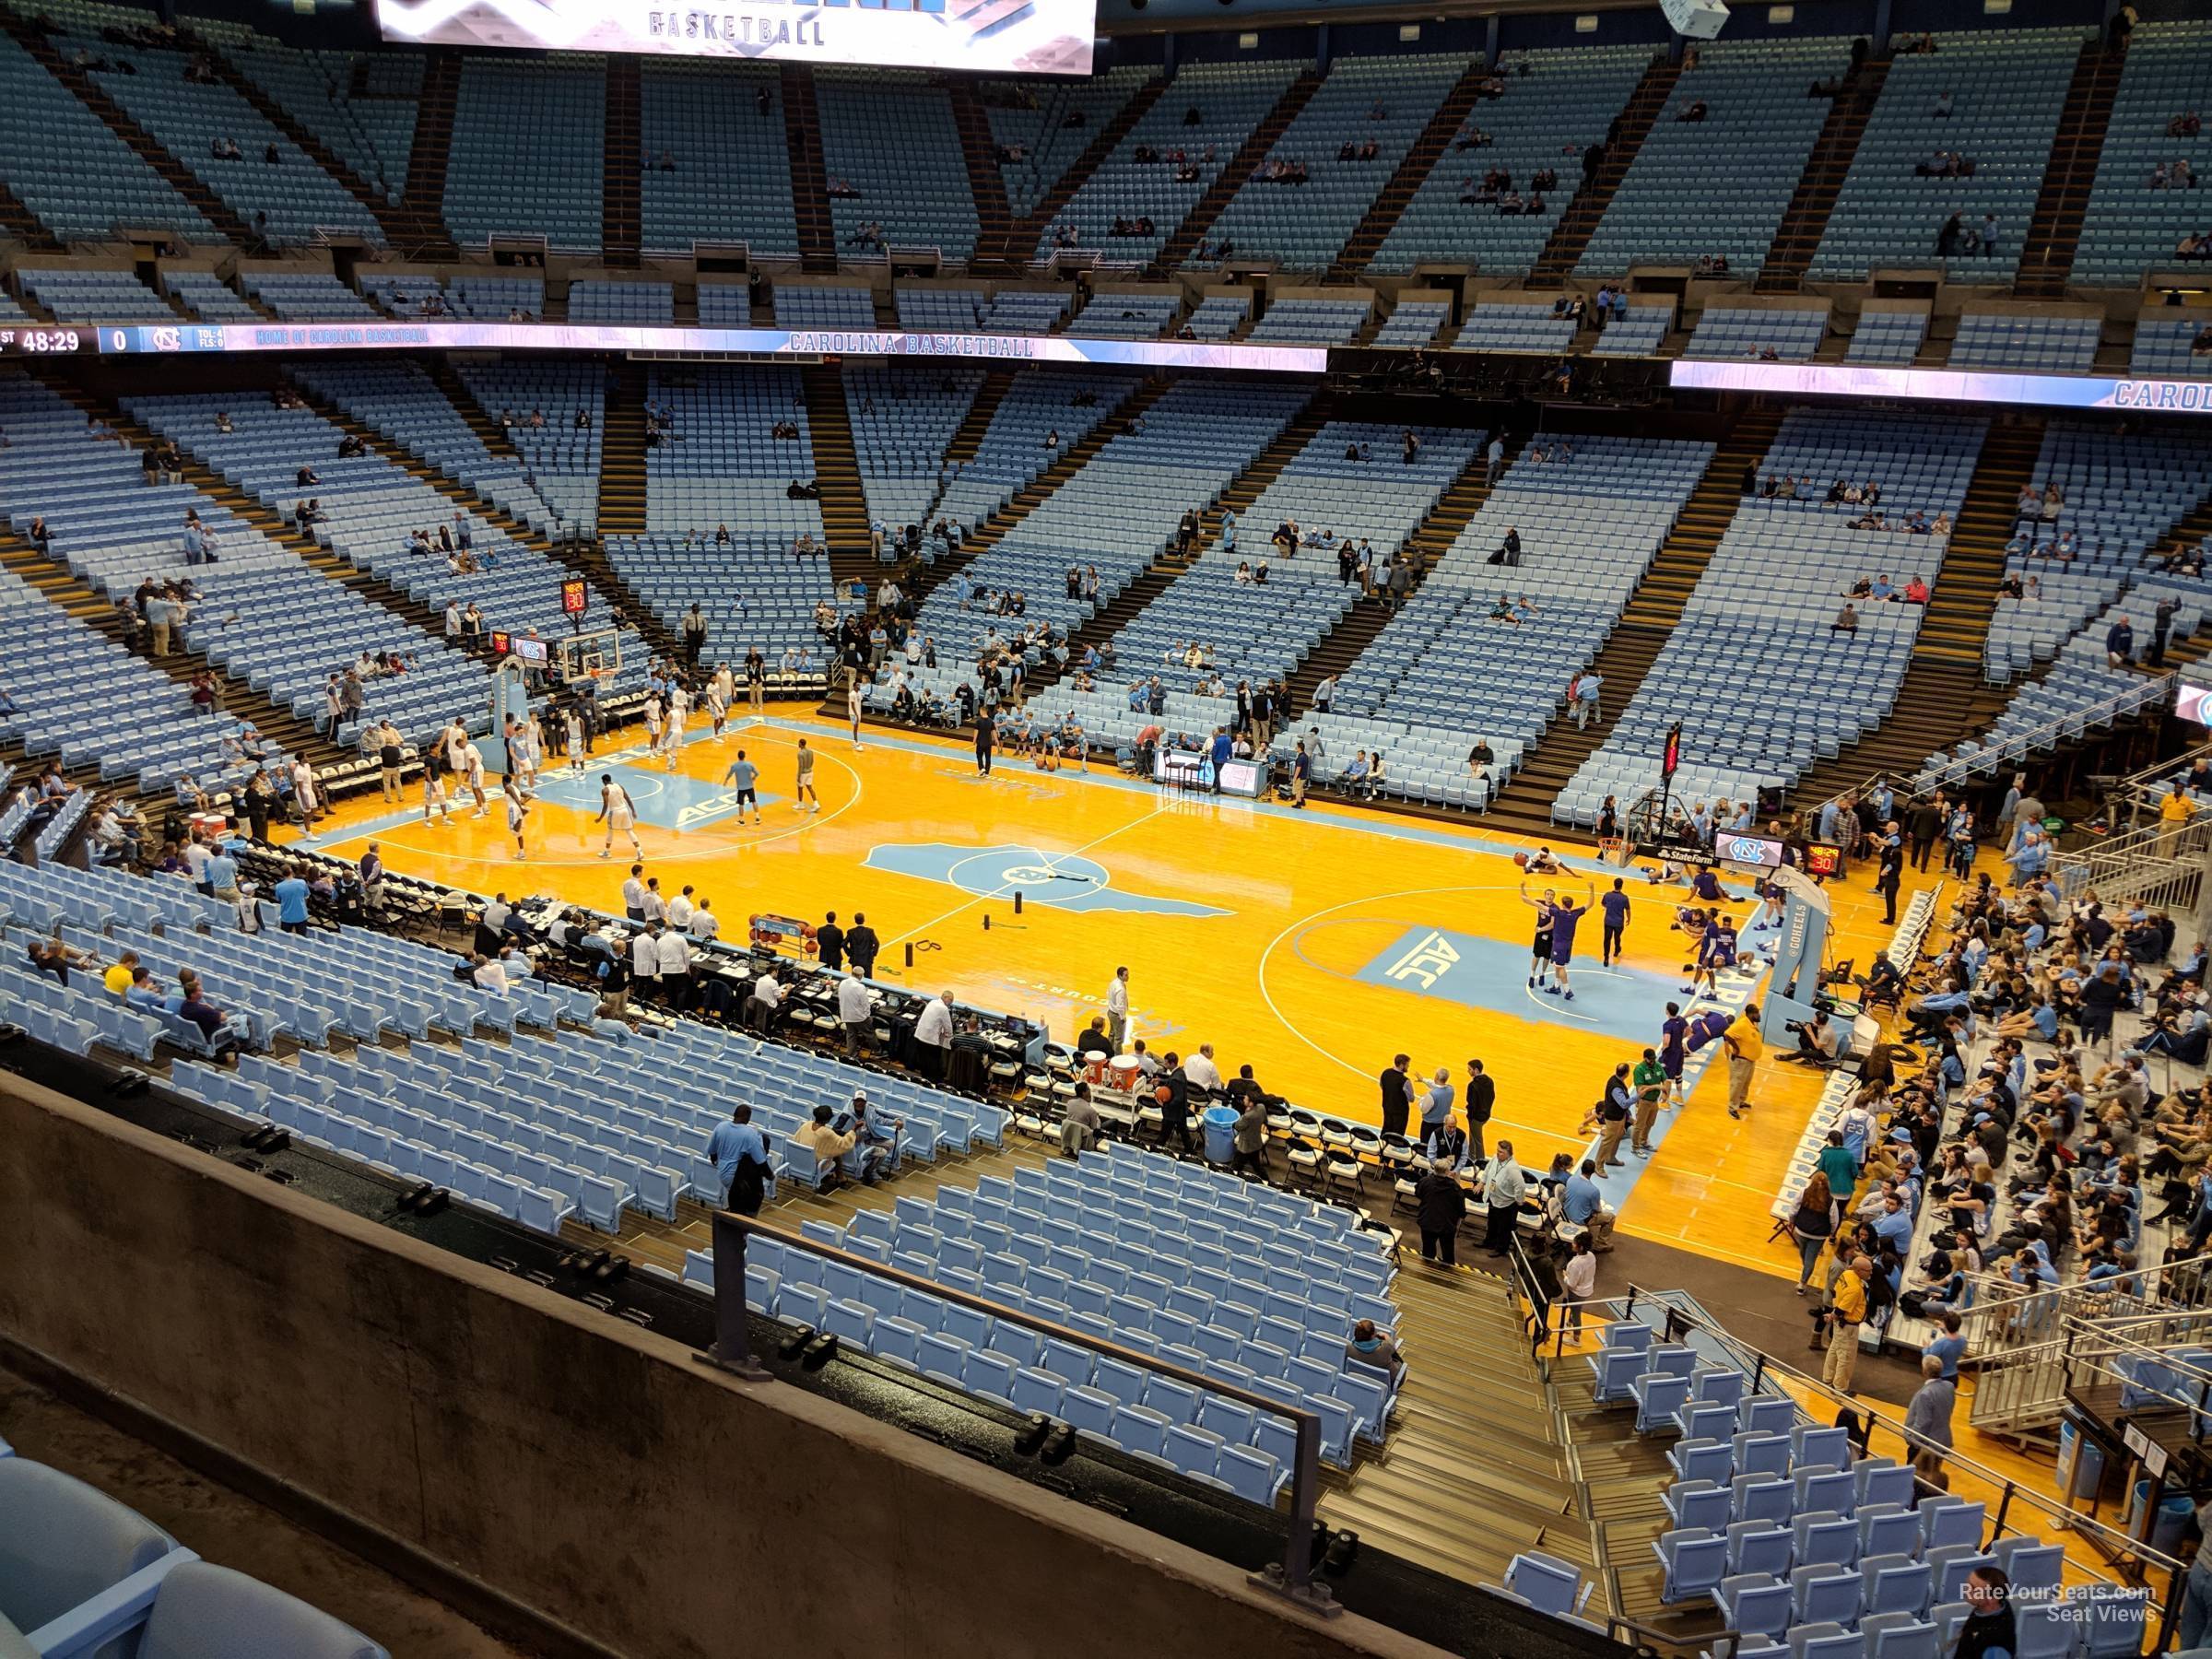 section 211, row c seat view  - dean smith center